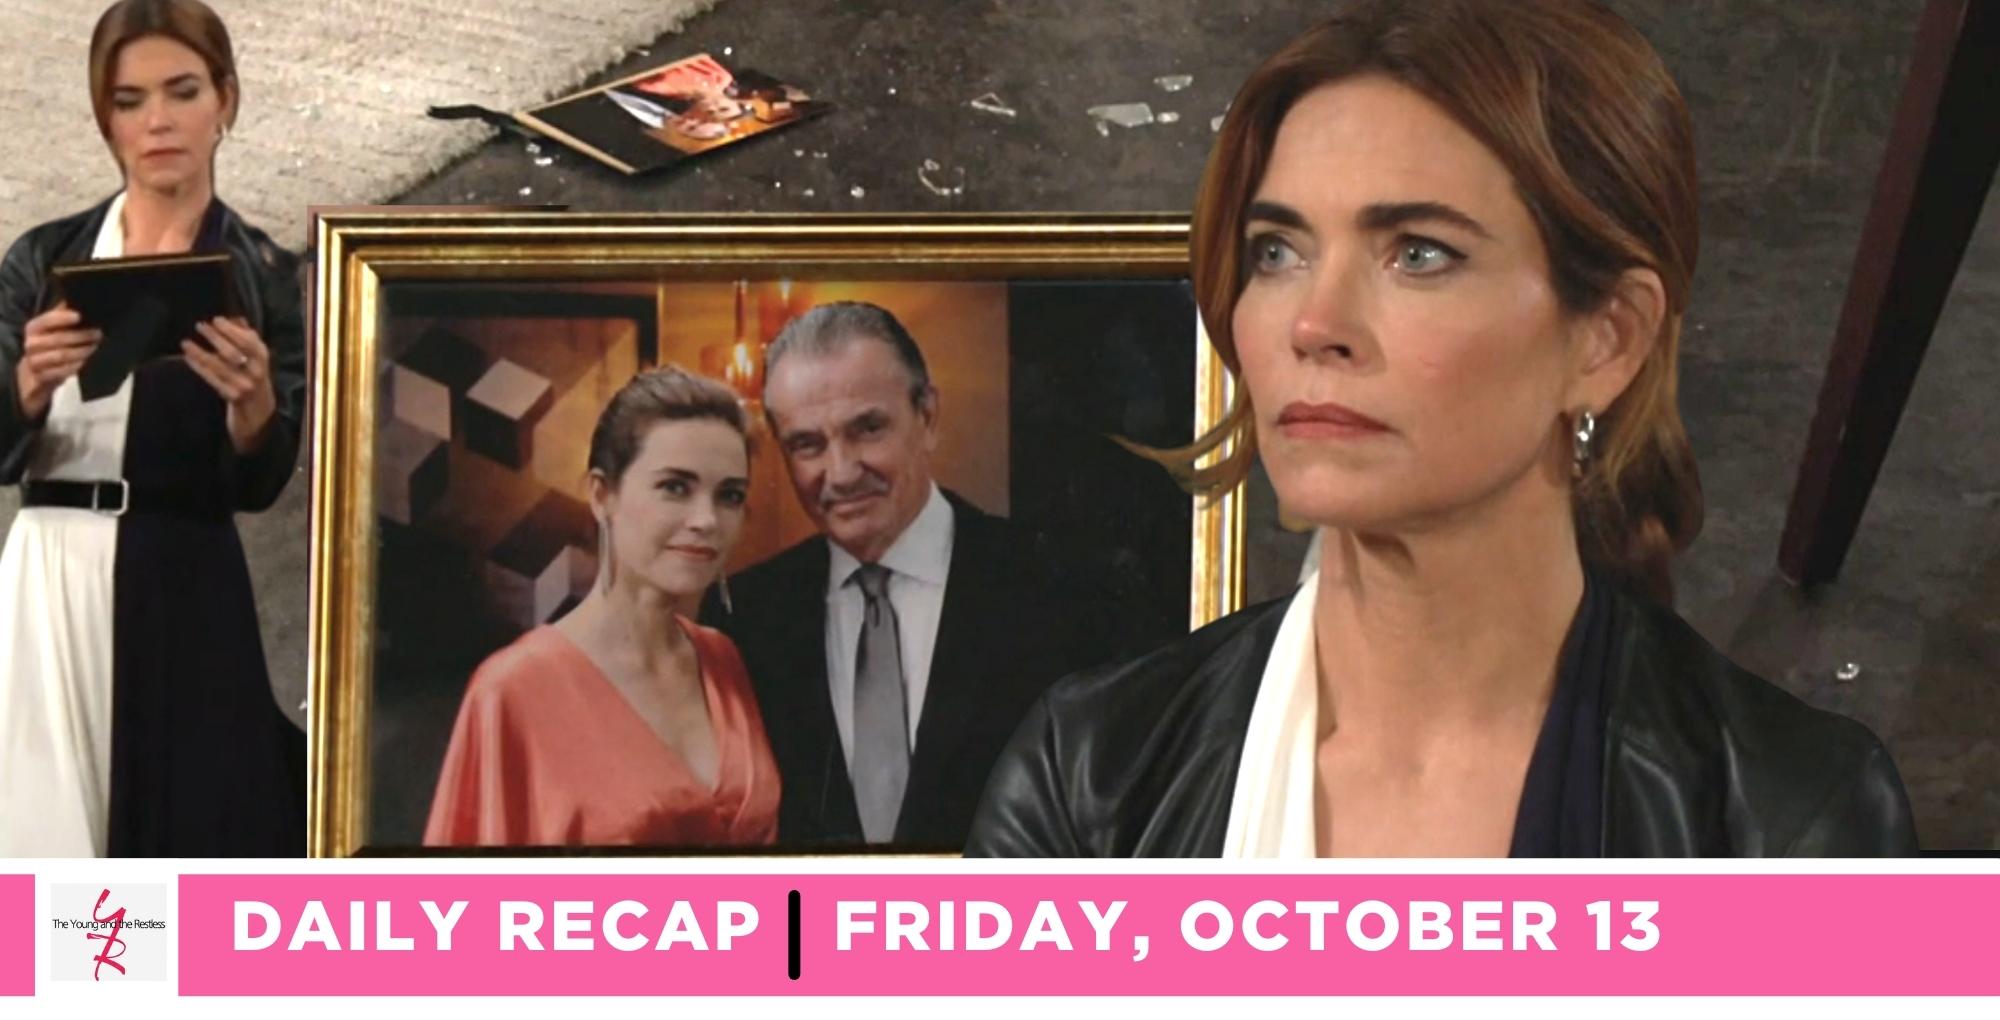 the young and the restless recap for october 13, 2023, has victoria looking at a picture of her with victor and destroying it.